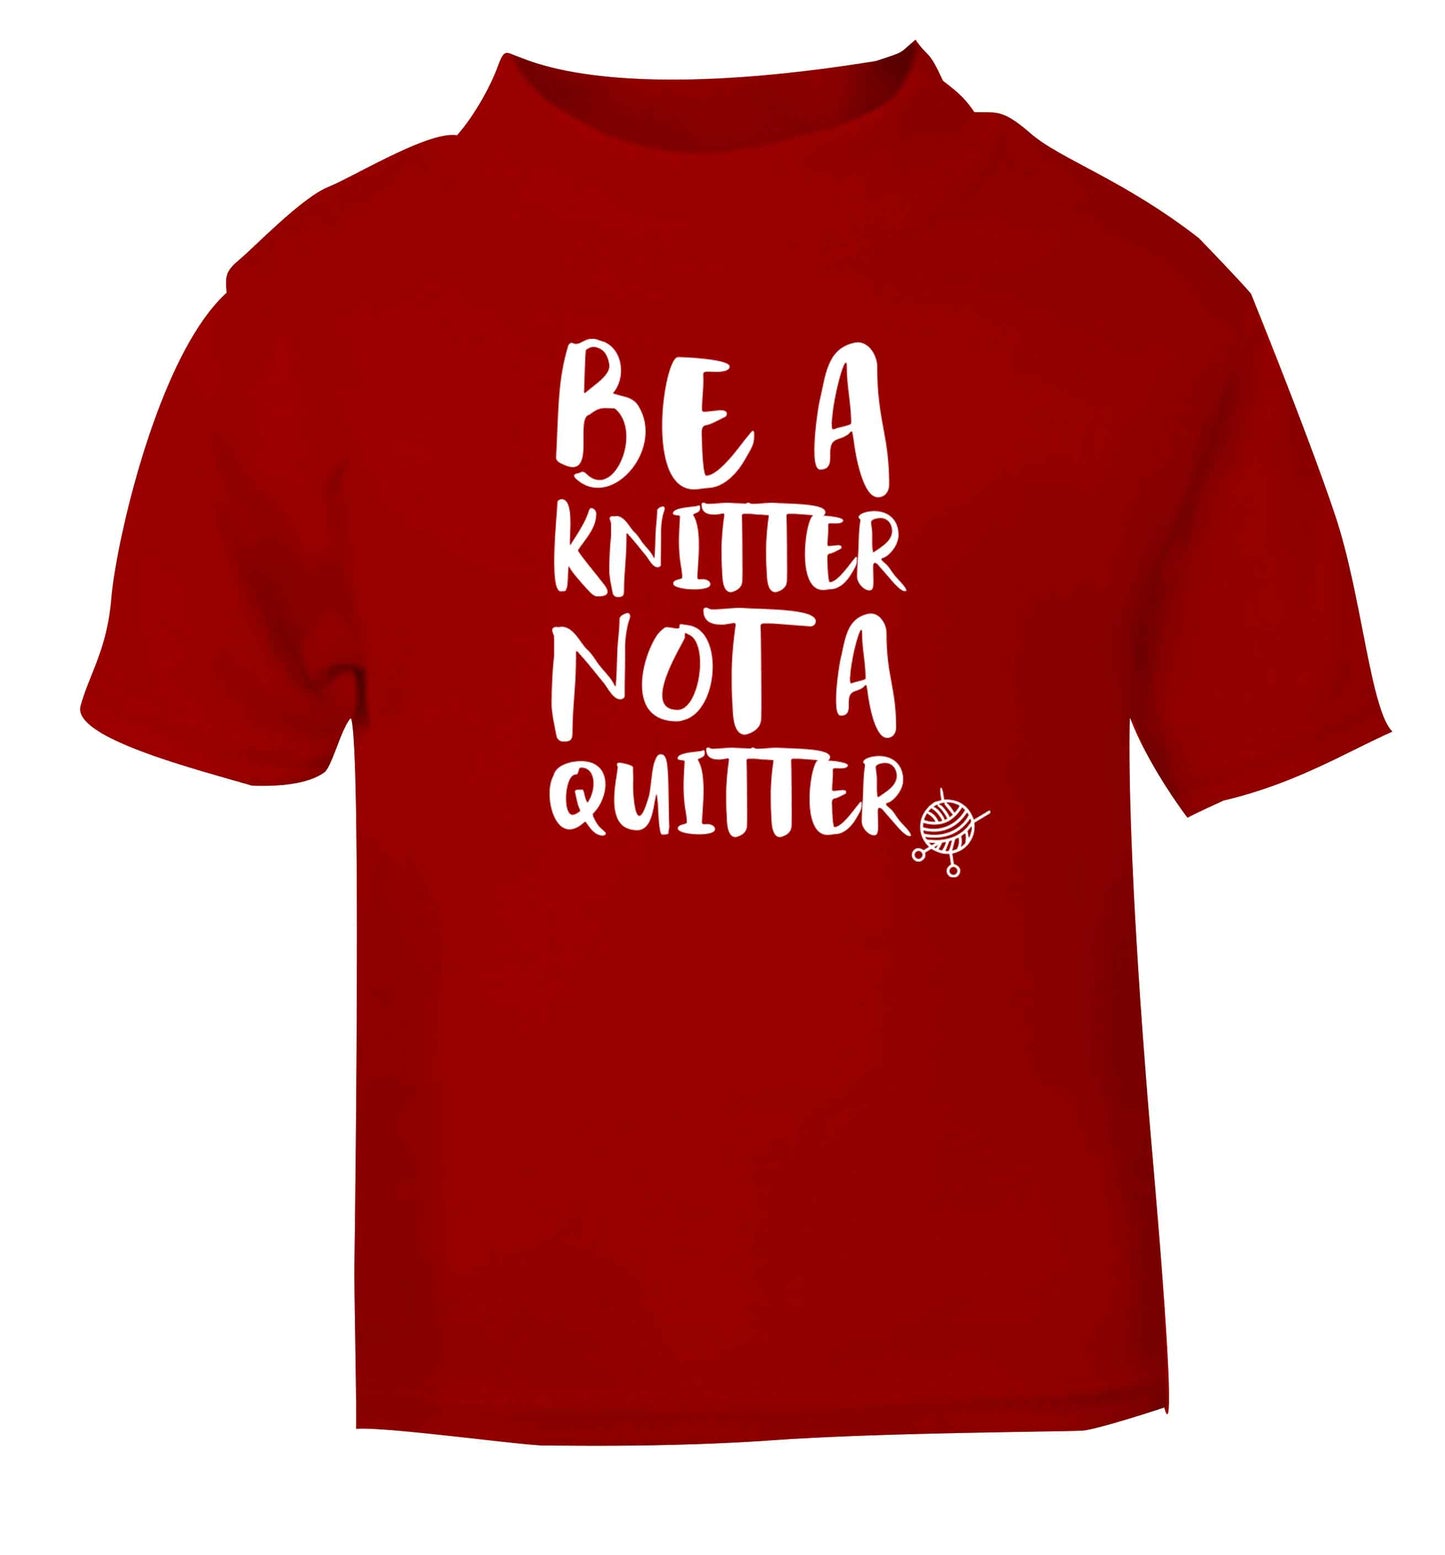 Be a knitter not a quitter red Baby Toddler Tshirt 2 Years